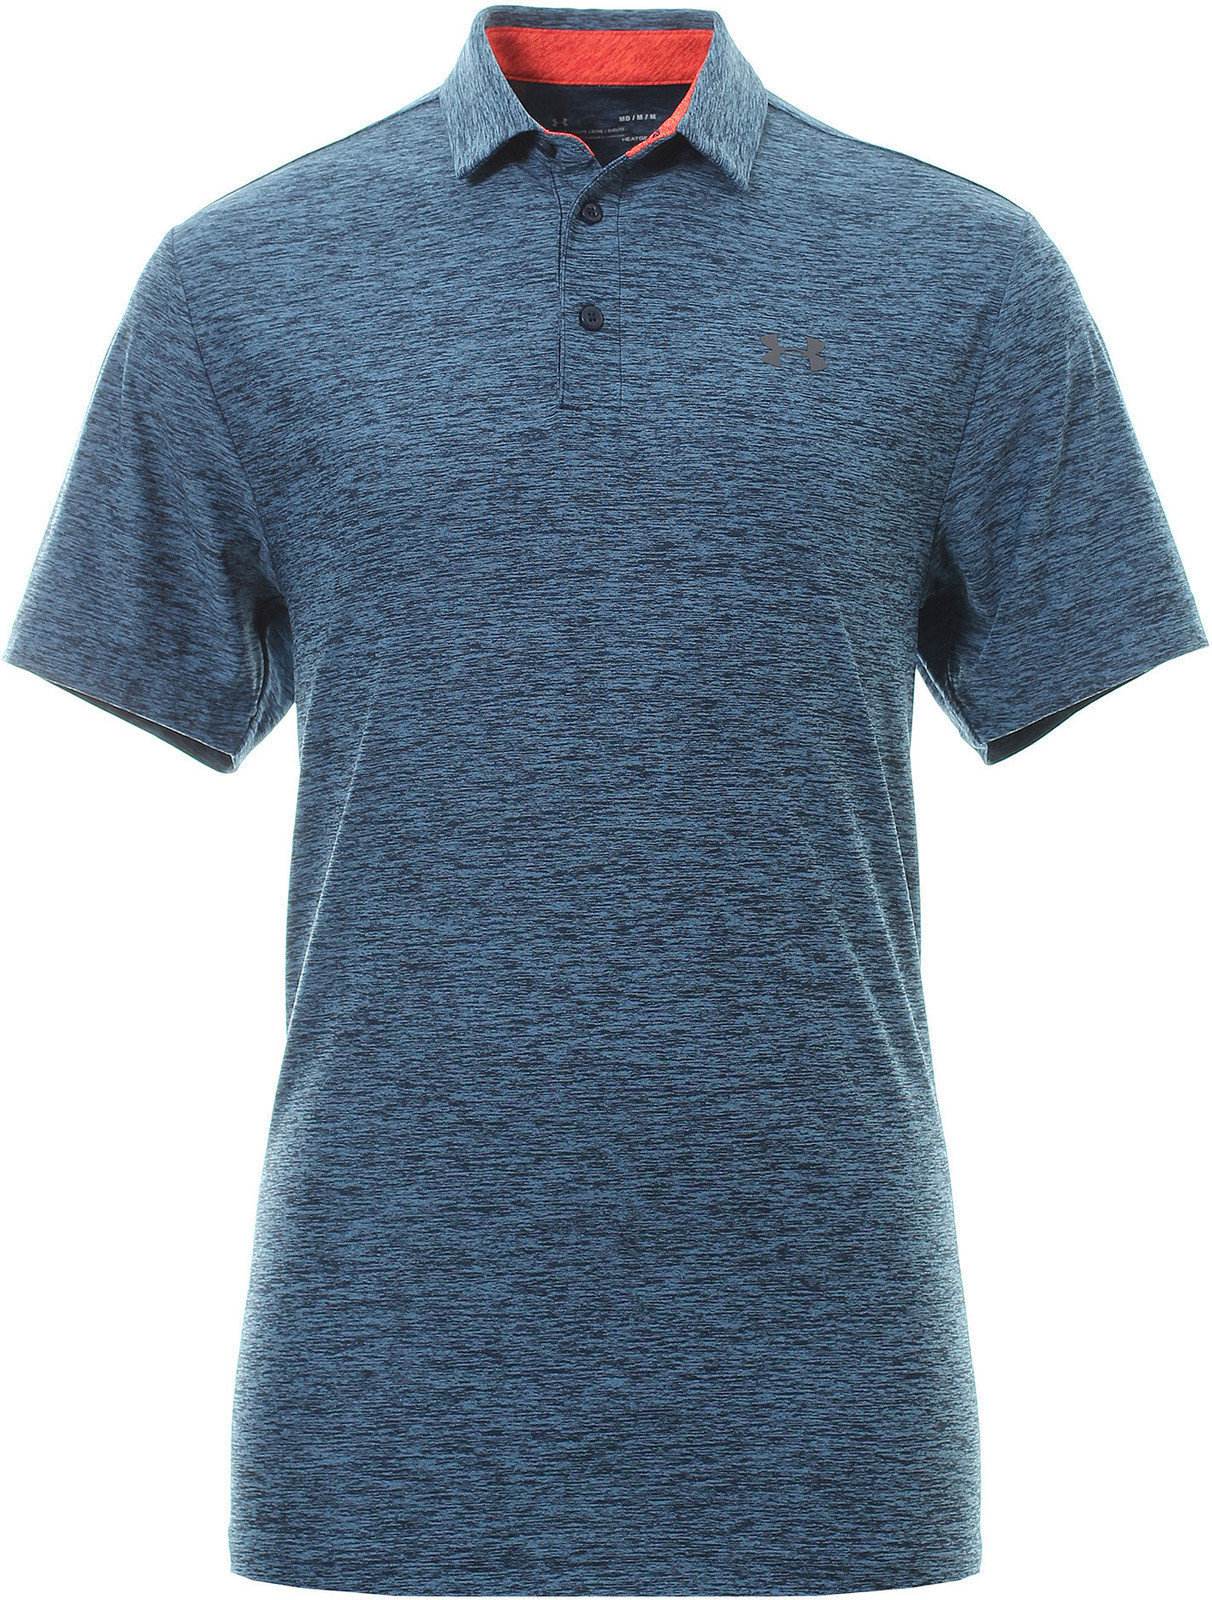 Polo Shirt Under Armour Playoff Polo Navy Heather S